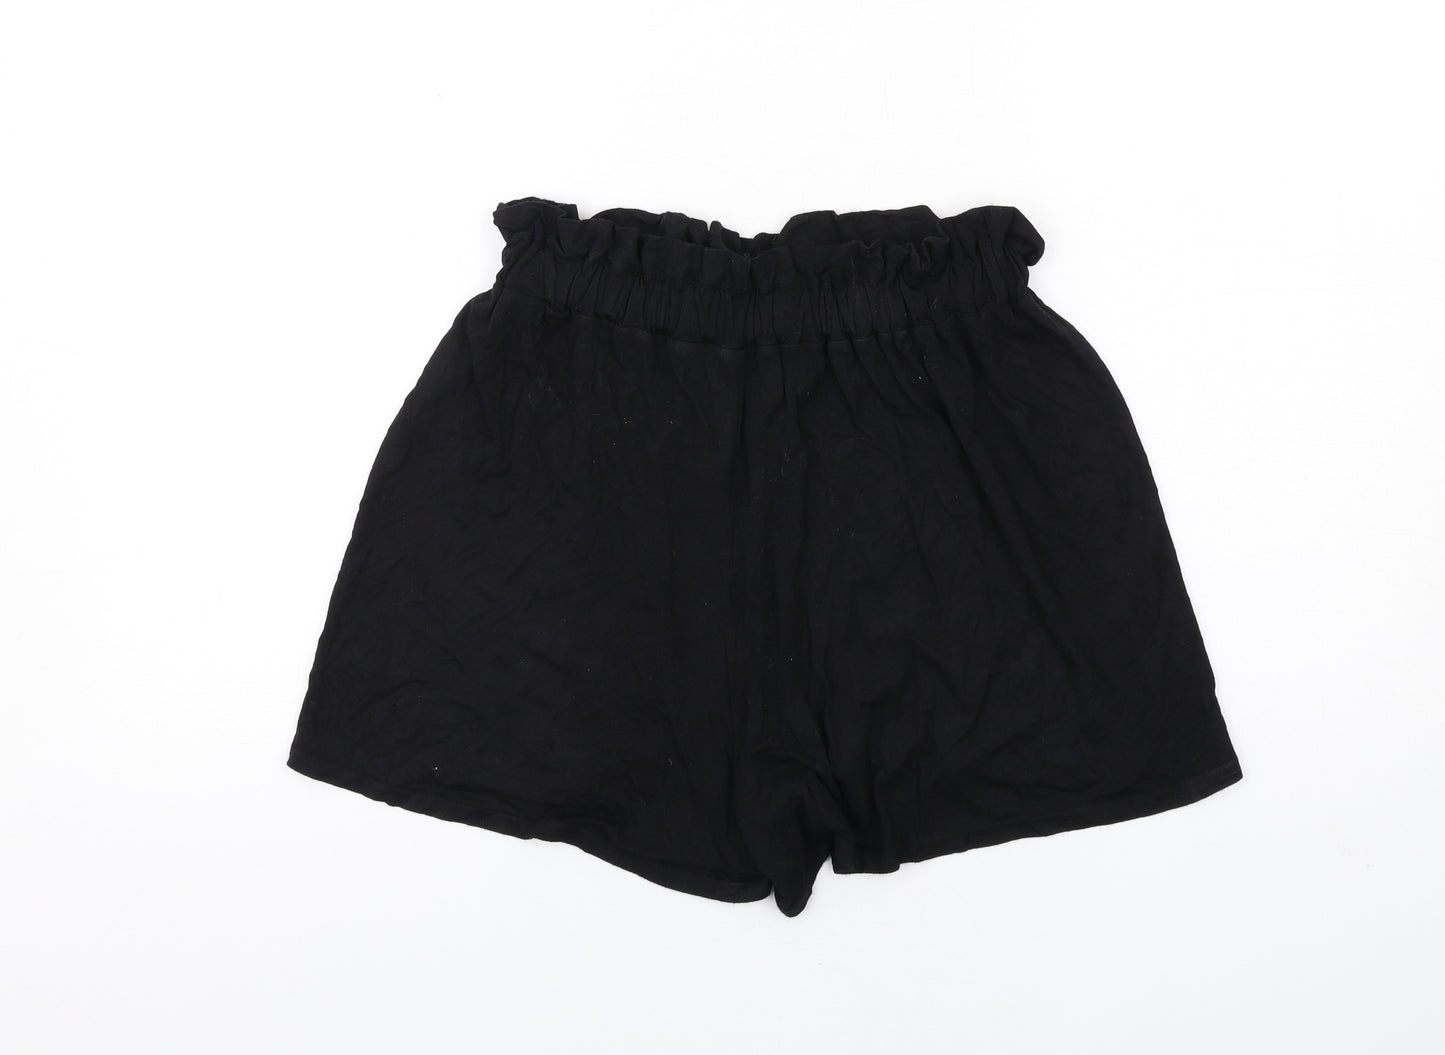 I SAW IT FIRST Womens Black Vinyl Paperbag Shorts Size 10 Regular Pull On